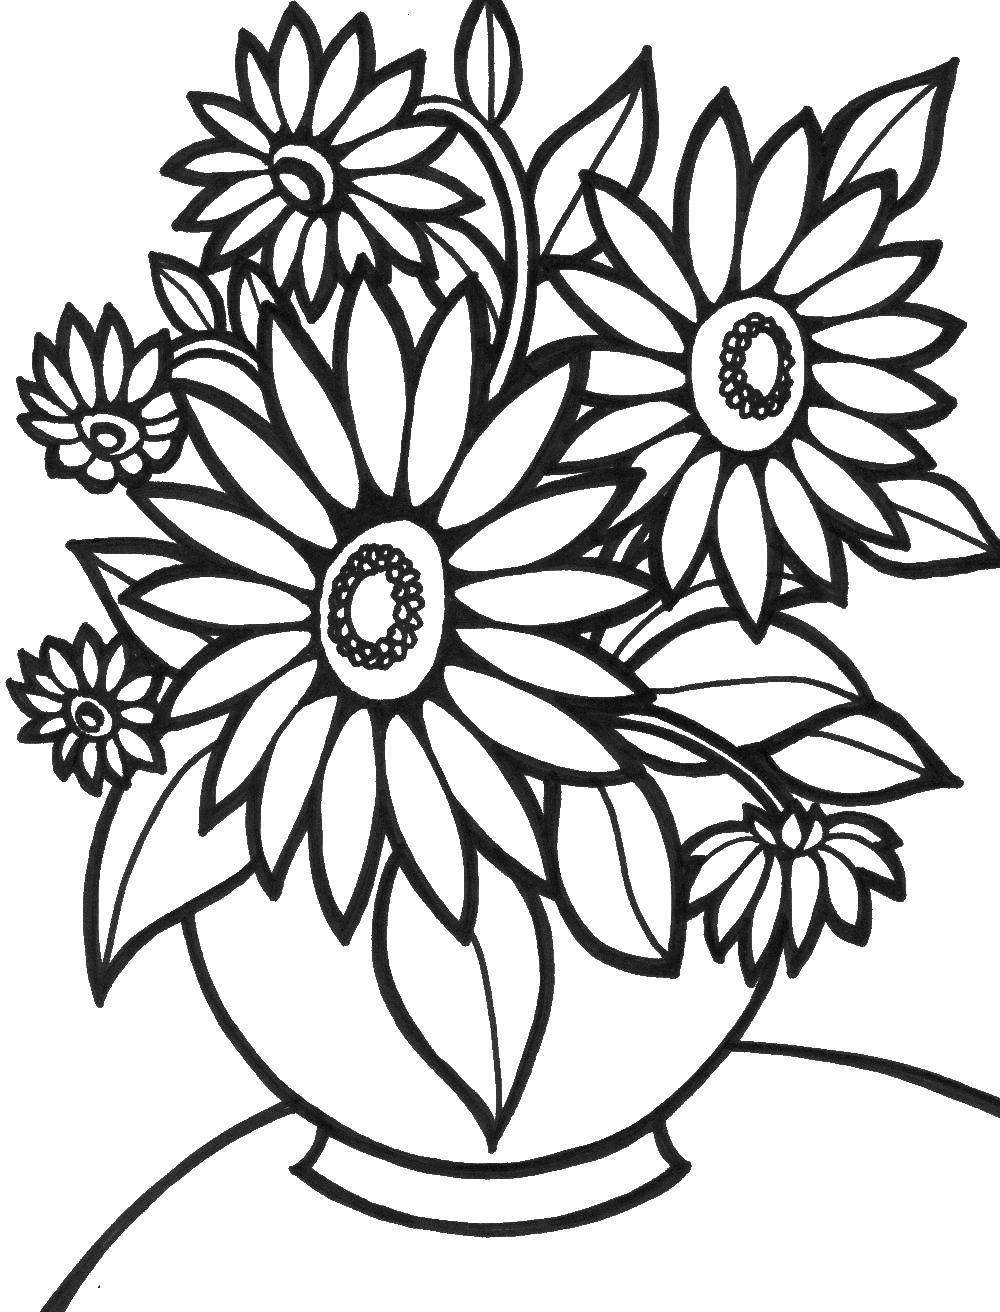 Coloring A bouquet of flowers in a vase. Category Flowers. Tags:  Flowers, bouquet, vase.